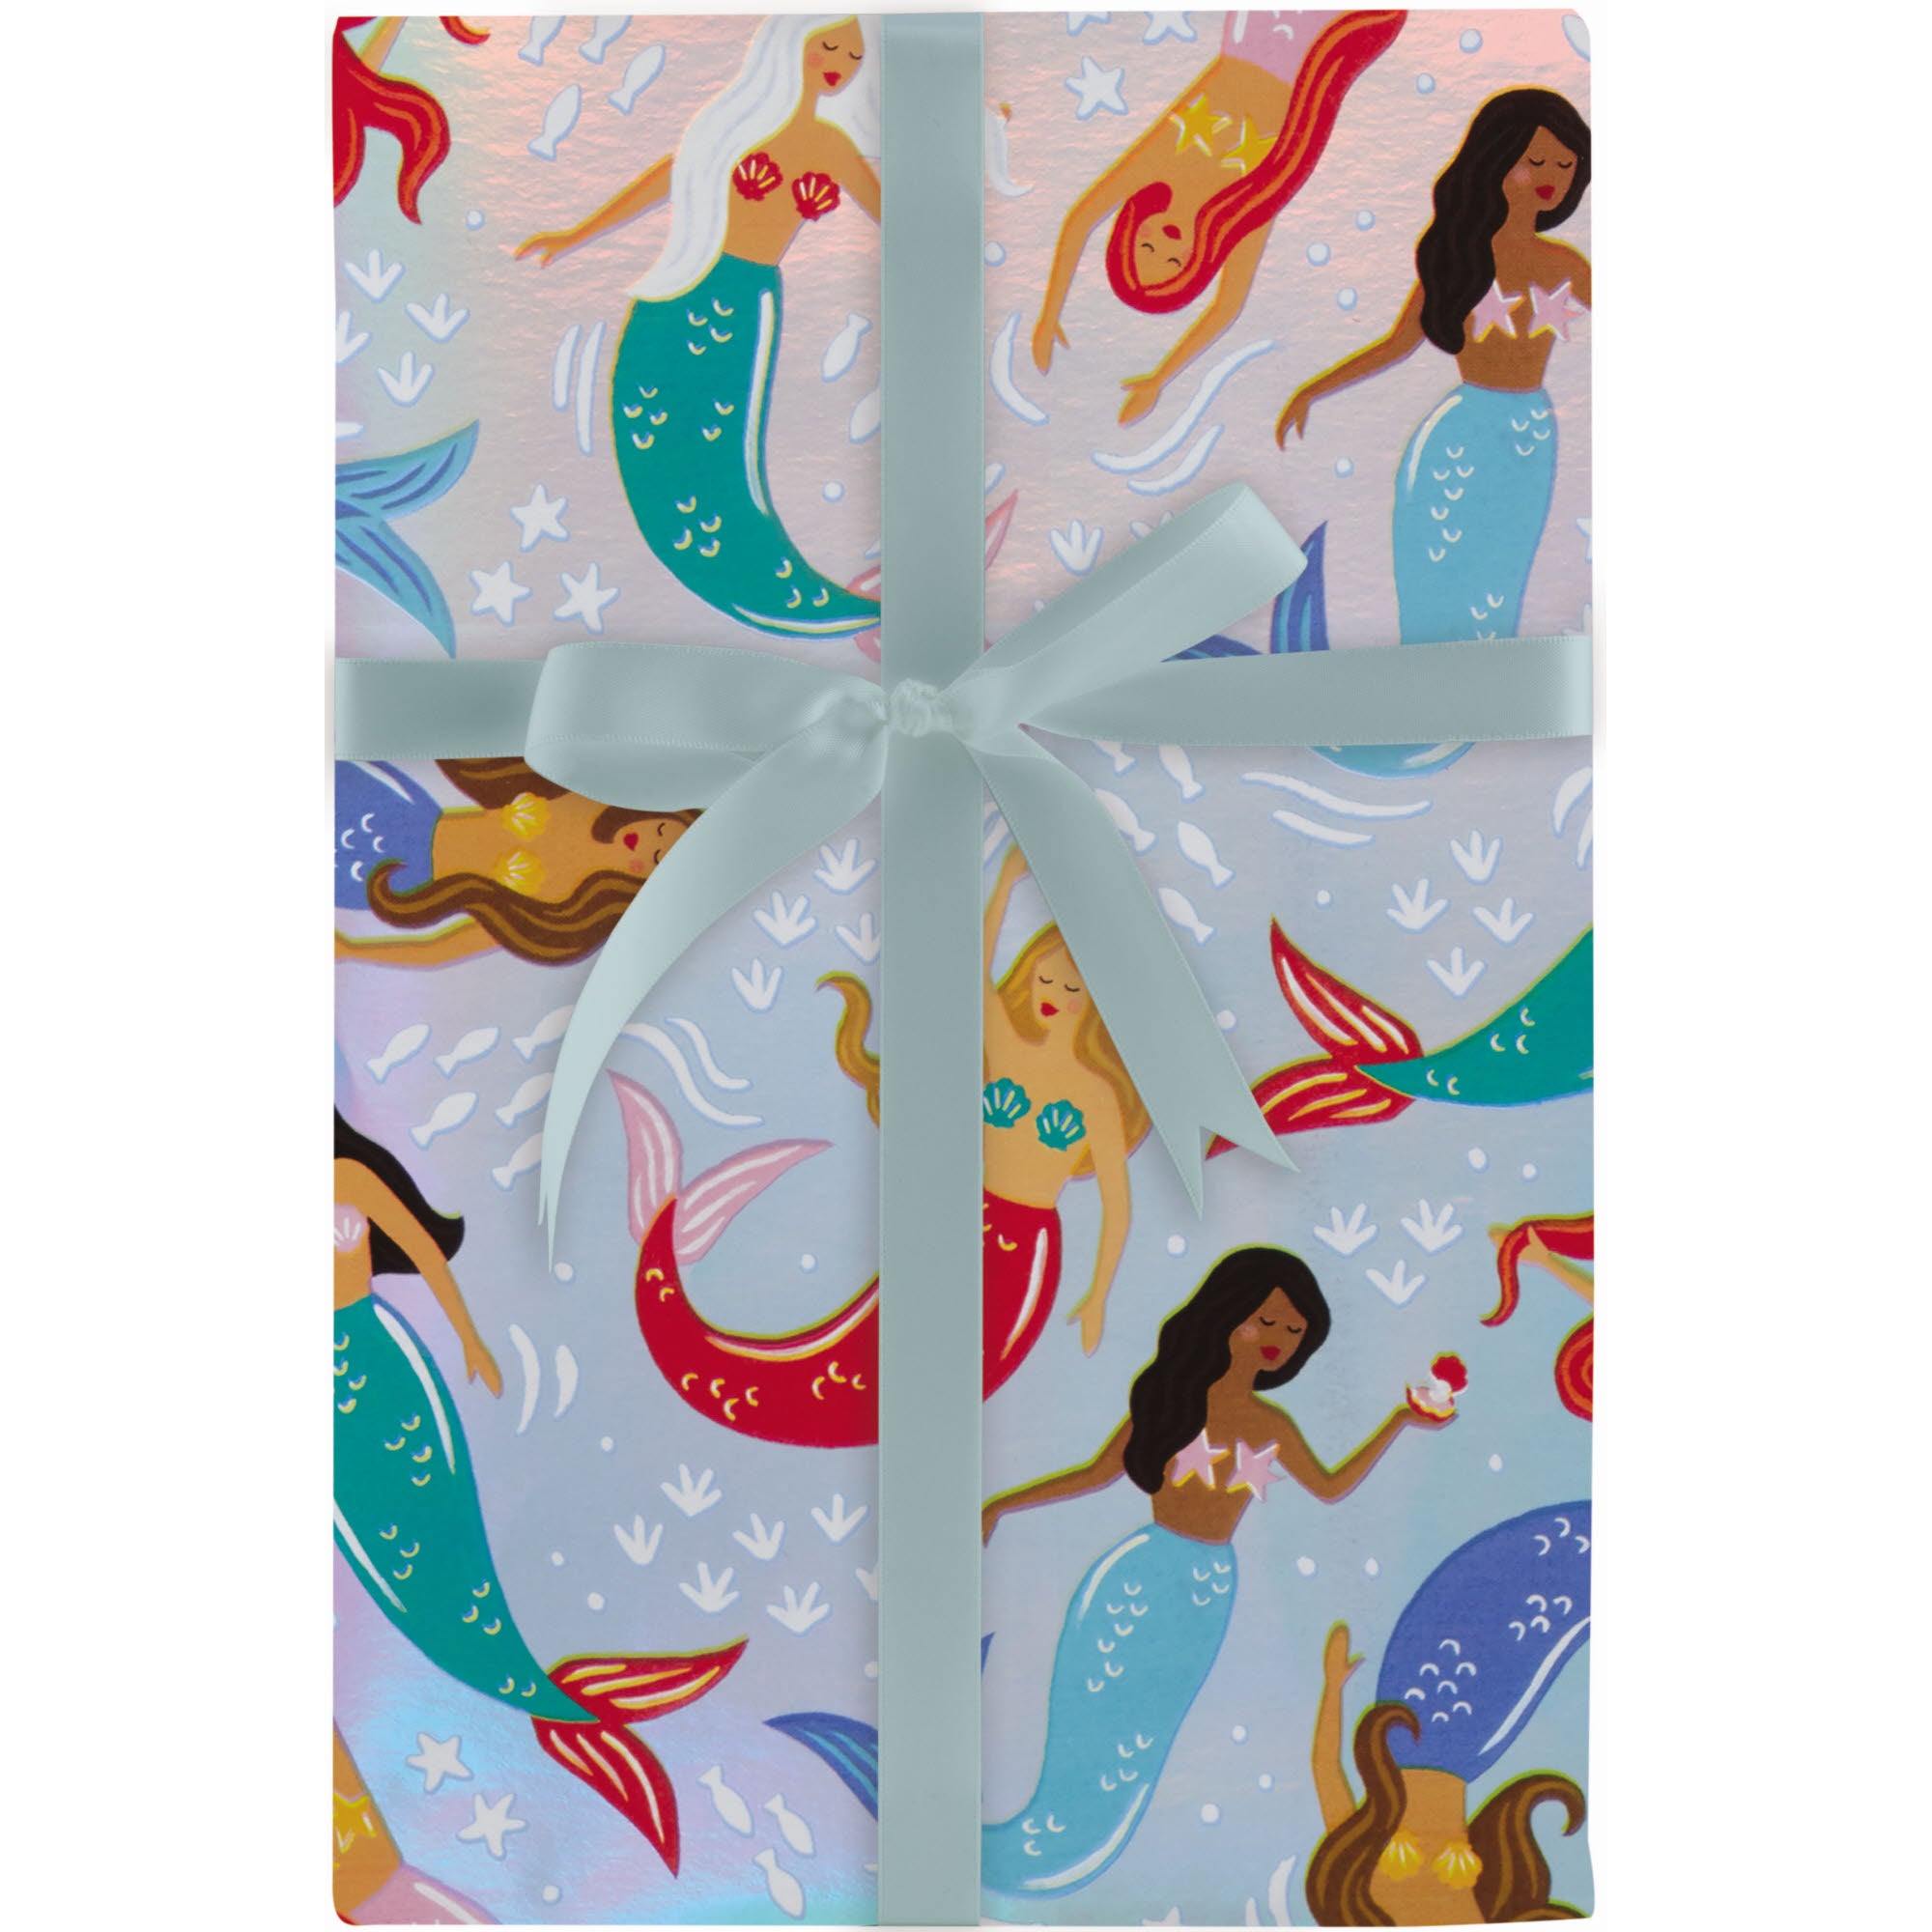 Mermaid Magic Wrapping Paper Roll